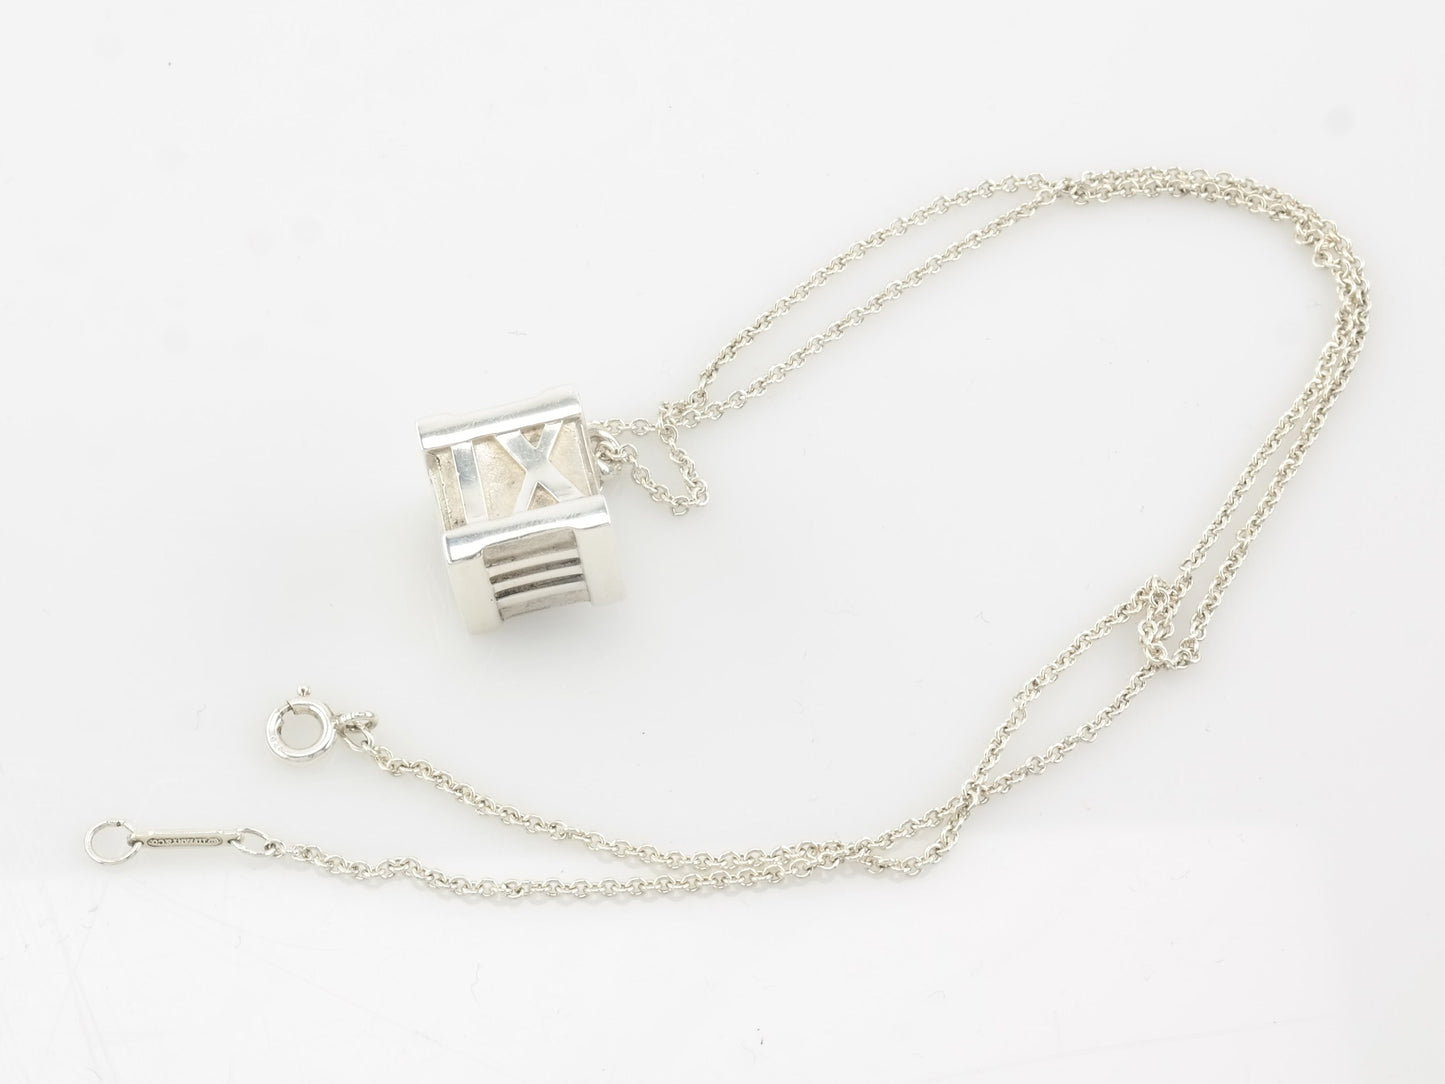 Vintage Tiffany & Co Sterling Silver Large Atlas Cube Necklace